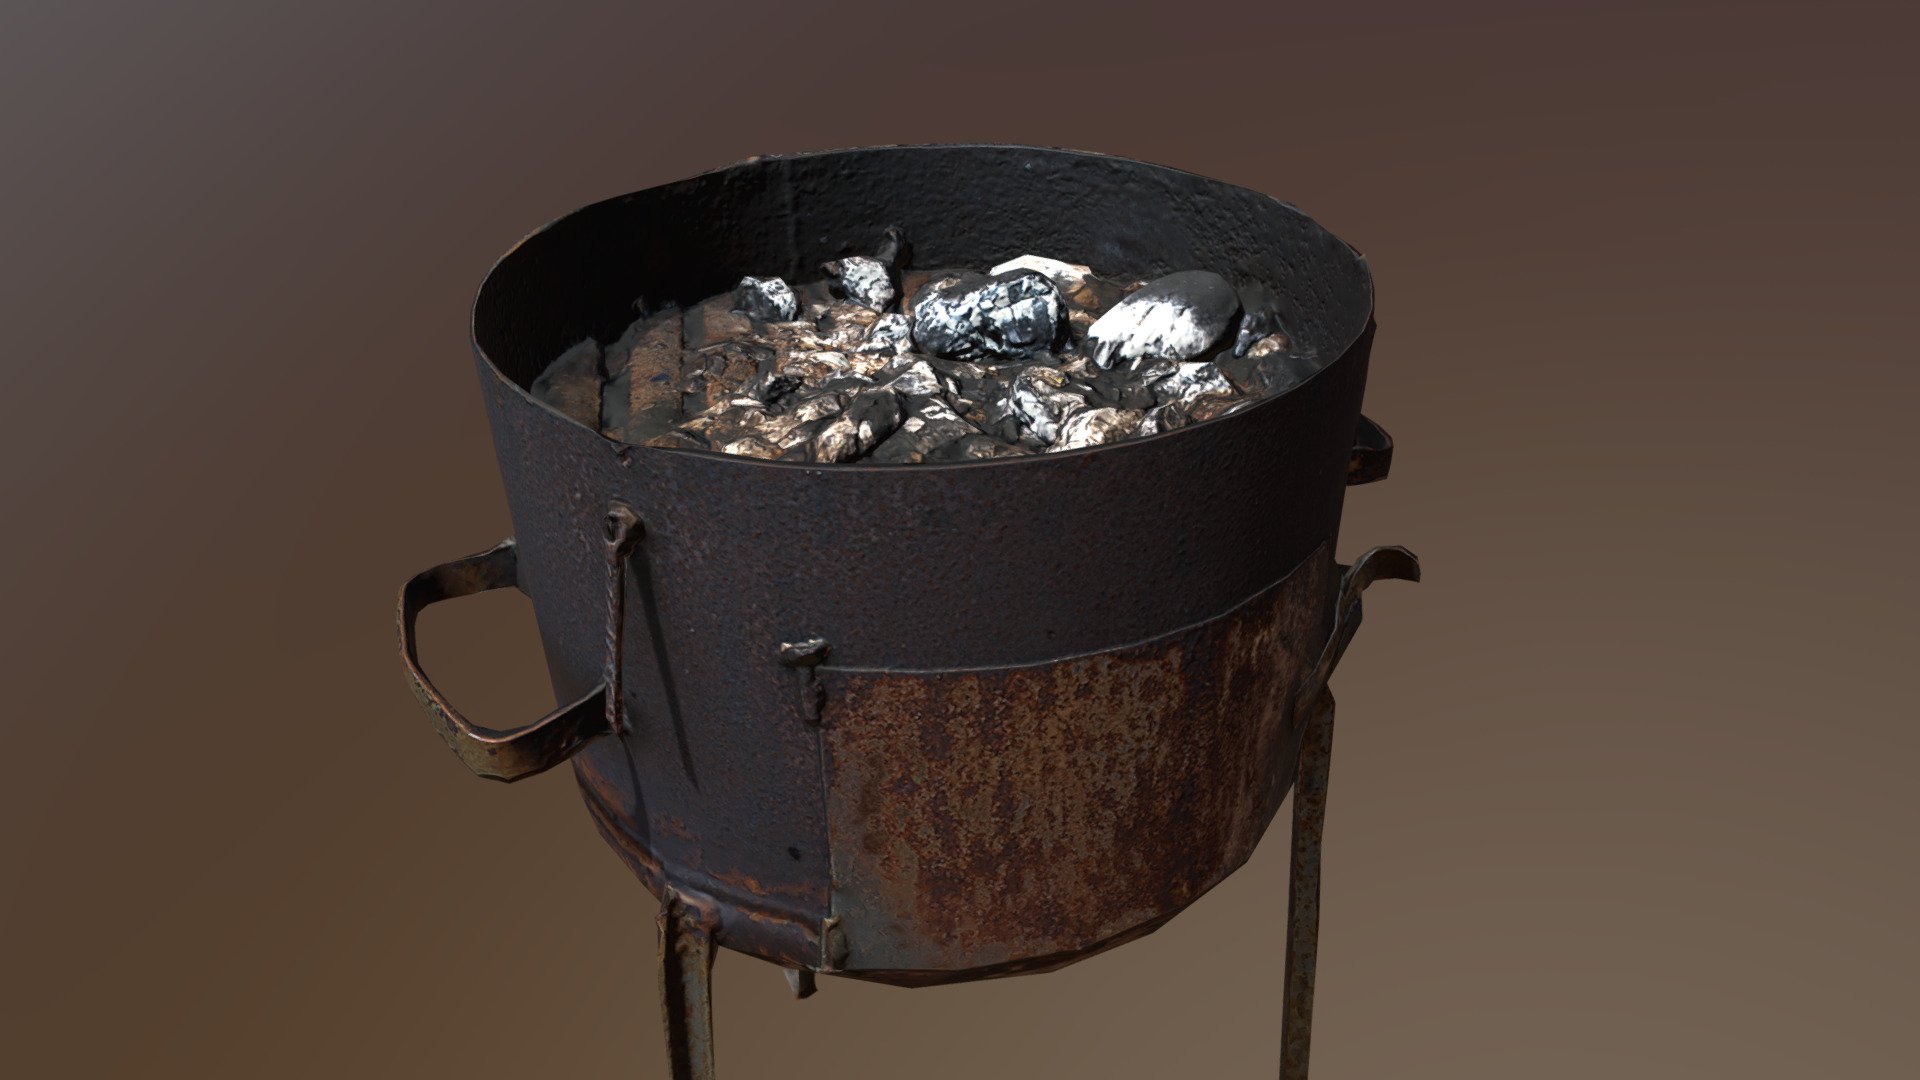 Barbecue BBQ photoscan model. 360 Degrees, decimated, cleaned, UV’ed &amp; PBR Textured.
Texture Set


2048x2048 / PNG
Albedo (Diffuse) / Roughness / Metallic / Normal / Ambient Occlusion

Vertex Count


3k Vertices 

Additional information


Real World Scale
Z up
Free of all legal issues as all branding and labels are adjusted.

Additional files


None

Disclaimer
If you need any support or assistance, or have feedback/questions, you can comment below or mail me and I will respond as quickly as possible.
High Poly Scan and Texture available upon request. 

Check out my other models and photoscans by following the link below.

Contact: hello@notoir.xyz 

More: https://notoir.xyz/featured-links/

Follow me on:
Instagram
Twitter
Artstation - Barbecue BBQ / Photoscan / Low/Mid Poly PBR - Buy Royalty Free 3D model by NOTOIR.XYZ (@Notoir) 3d model